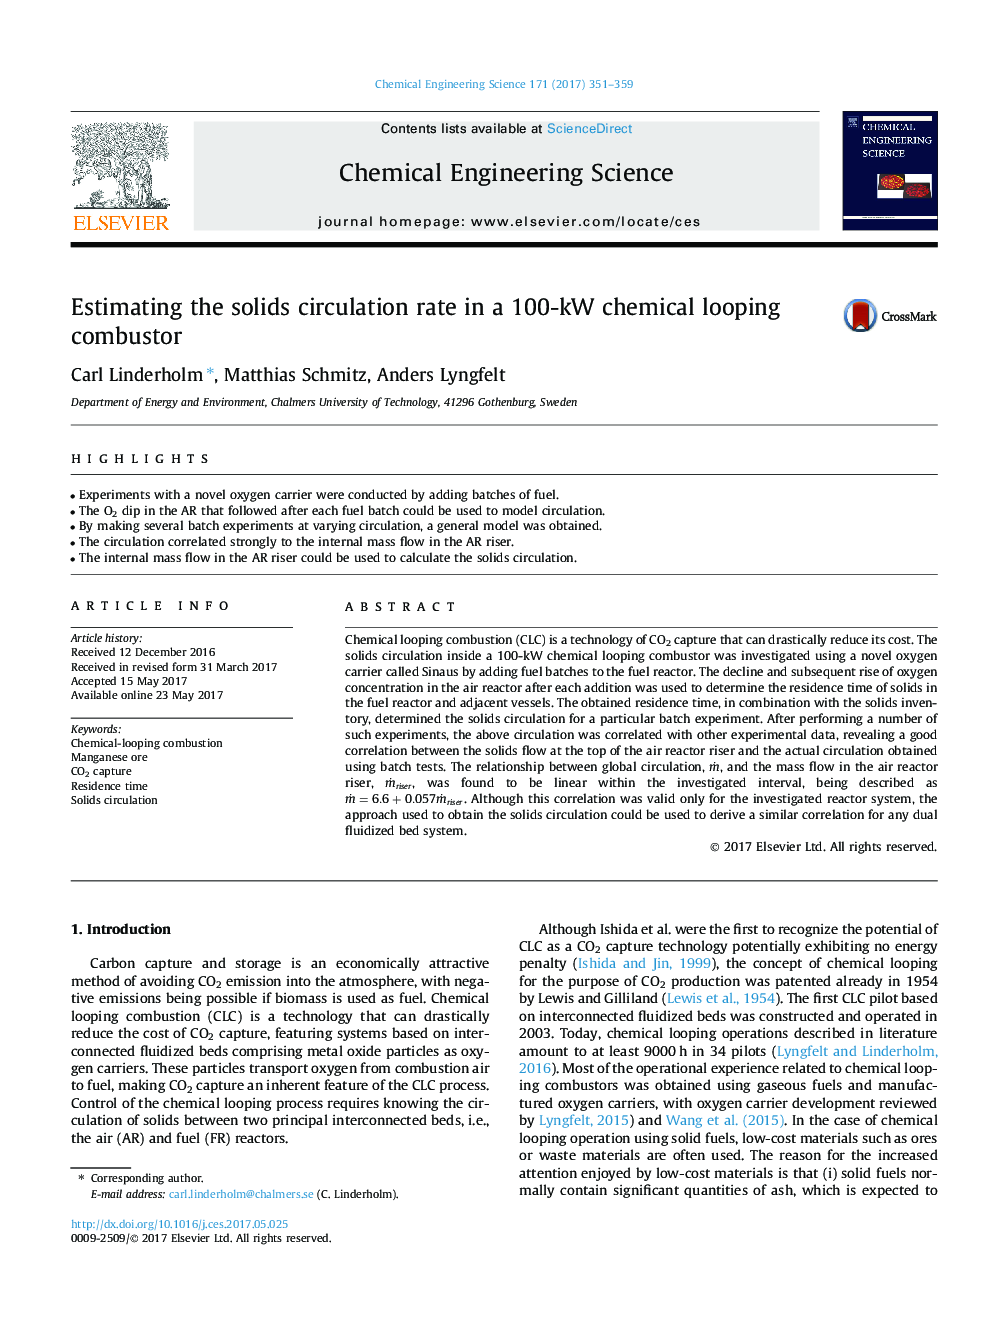 Estimating the solids circulation rate in a 100-kW chemical looping combustor